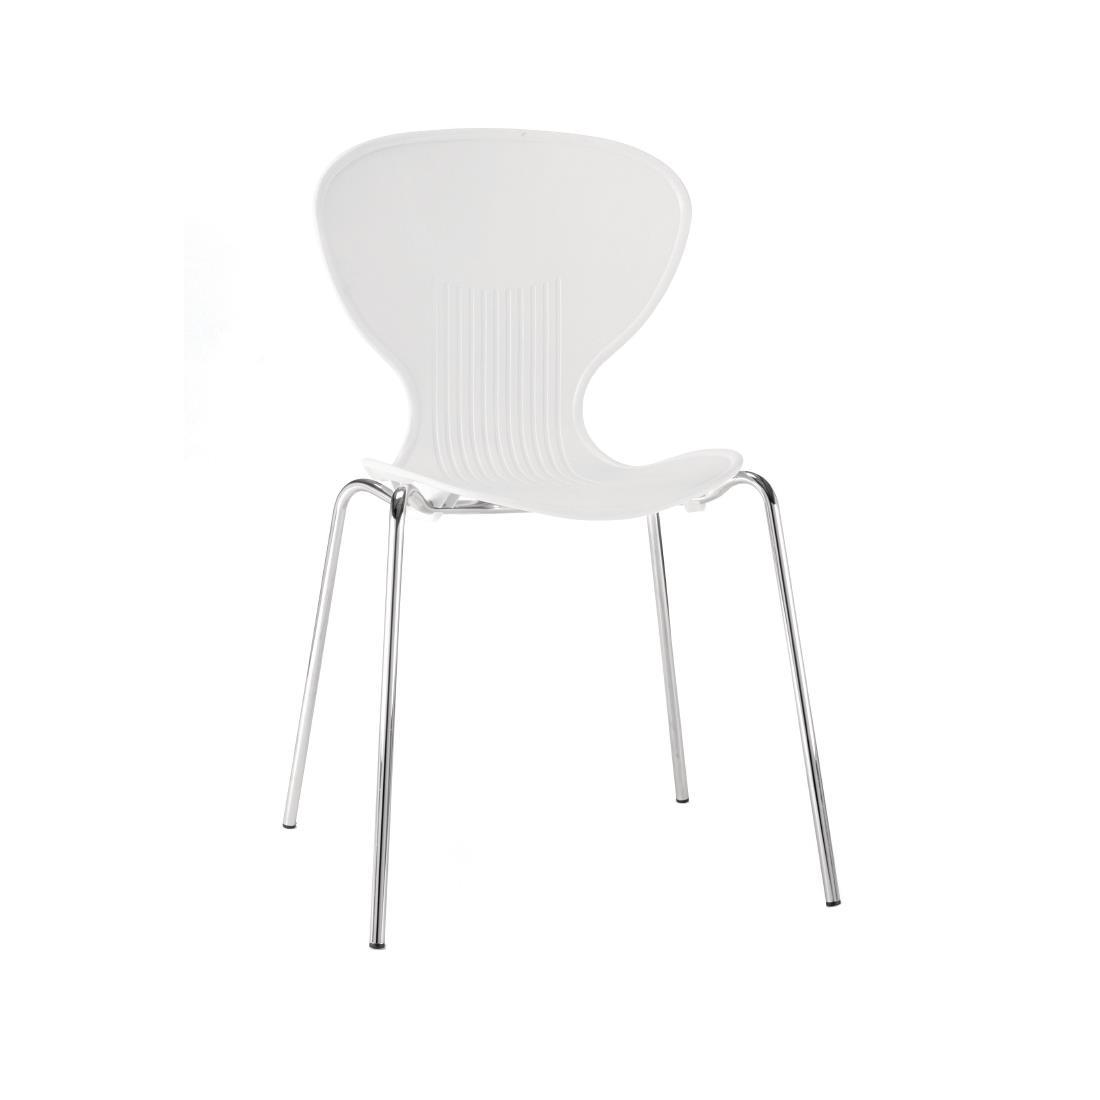 Bolero White Stacking Plastic Side Chairs - Case of 4 - GP501 - 1